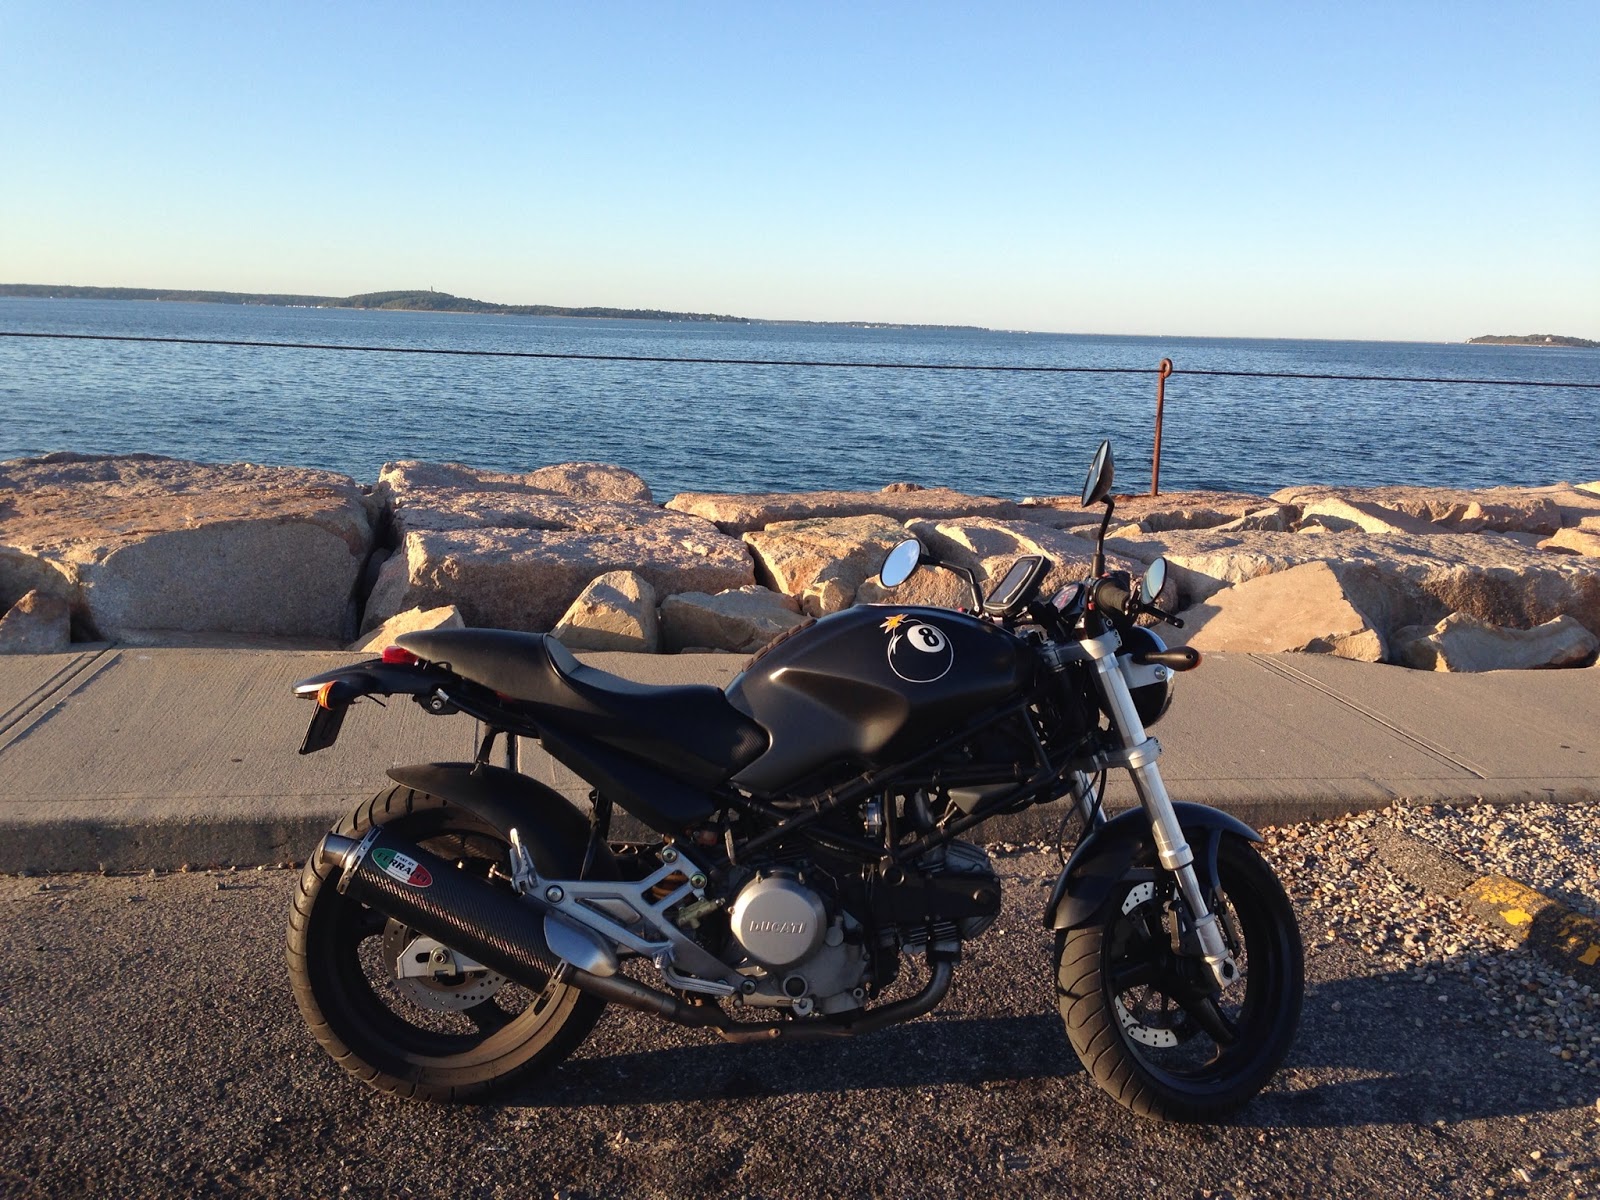 Boston Bay: NYDucati Lands on Plymouth Rock, Plymouth Massachusetts on a Tigho Ducati Trip.